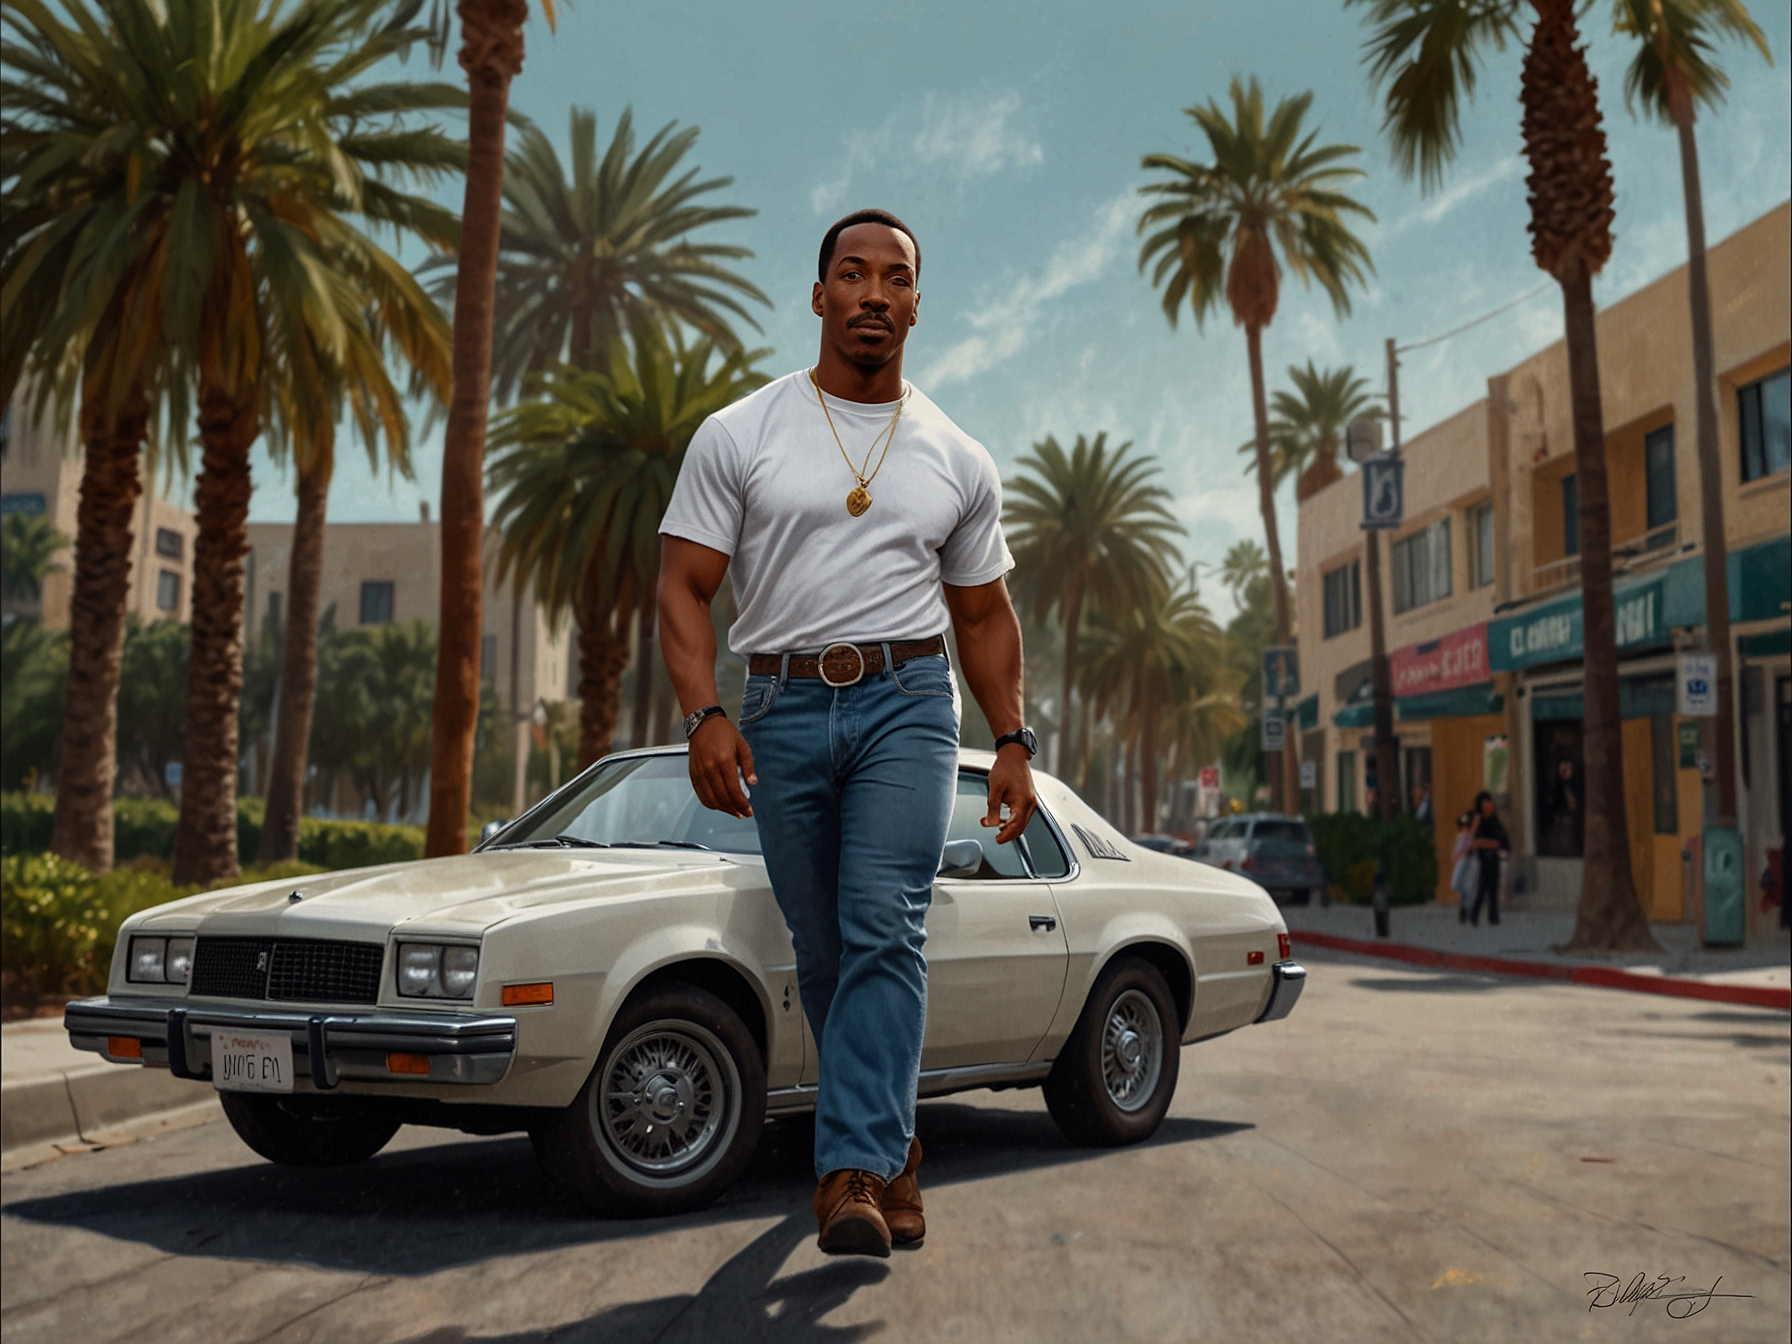 Eddie Murphy returns as Axel Foley in 'Beverly Hills Cop: Axel F.' The image shows Murphy in a classic action-comedy scene, blending nostalgia with fresh, new adventures.